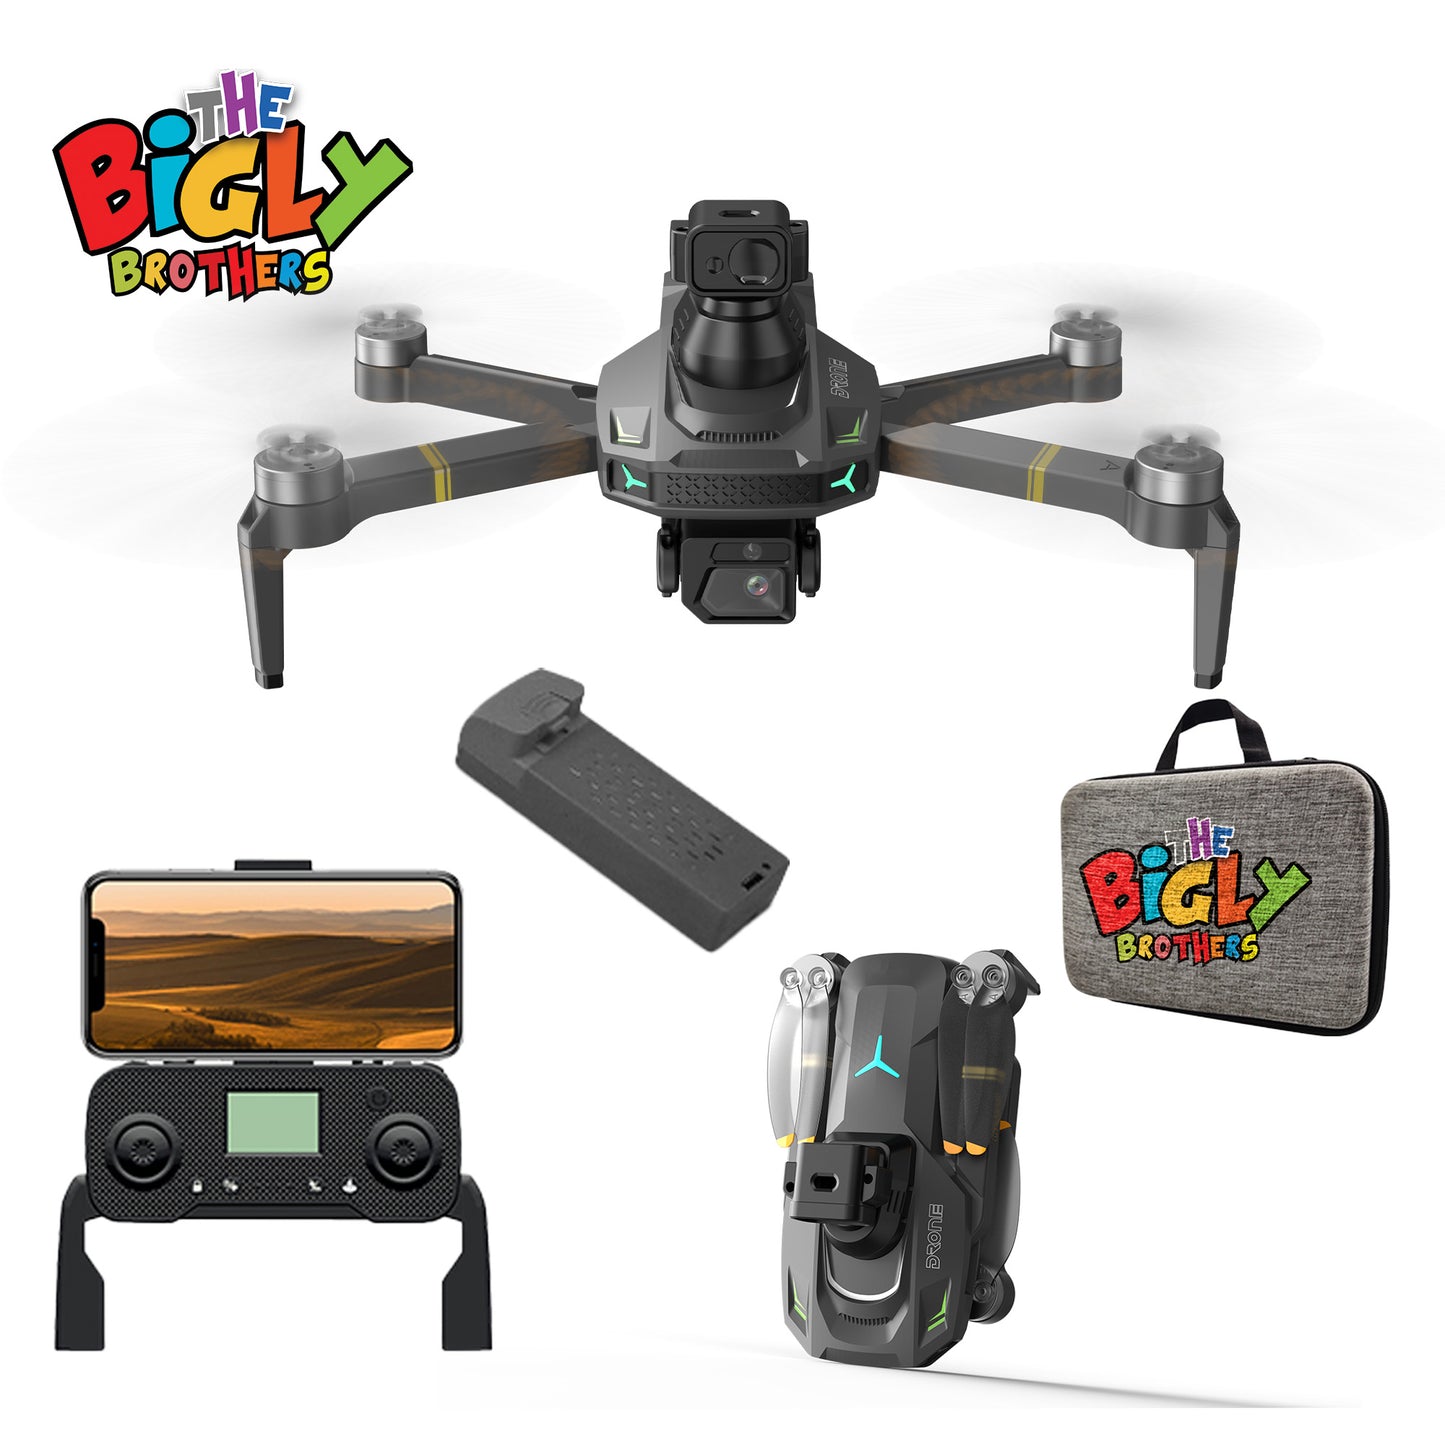 REFURBISHED: The Bigly Brothers E59 Mark III Delta Black Superior Edition, 30-Min Flight Time, Obstacle Avoidance Drone with Camera, 720 Degrees of Obstacle Avoidance Drone with Carrying Case Below 249g